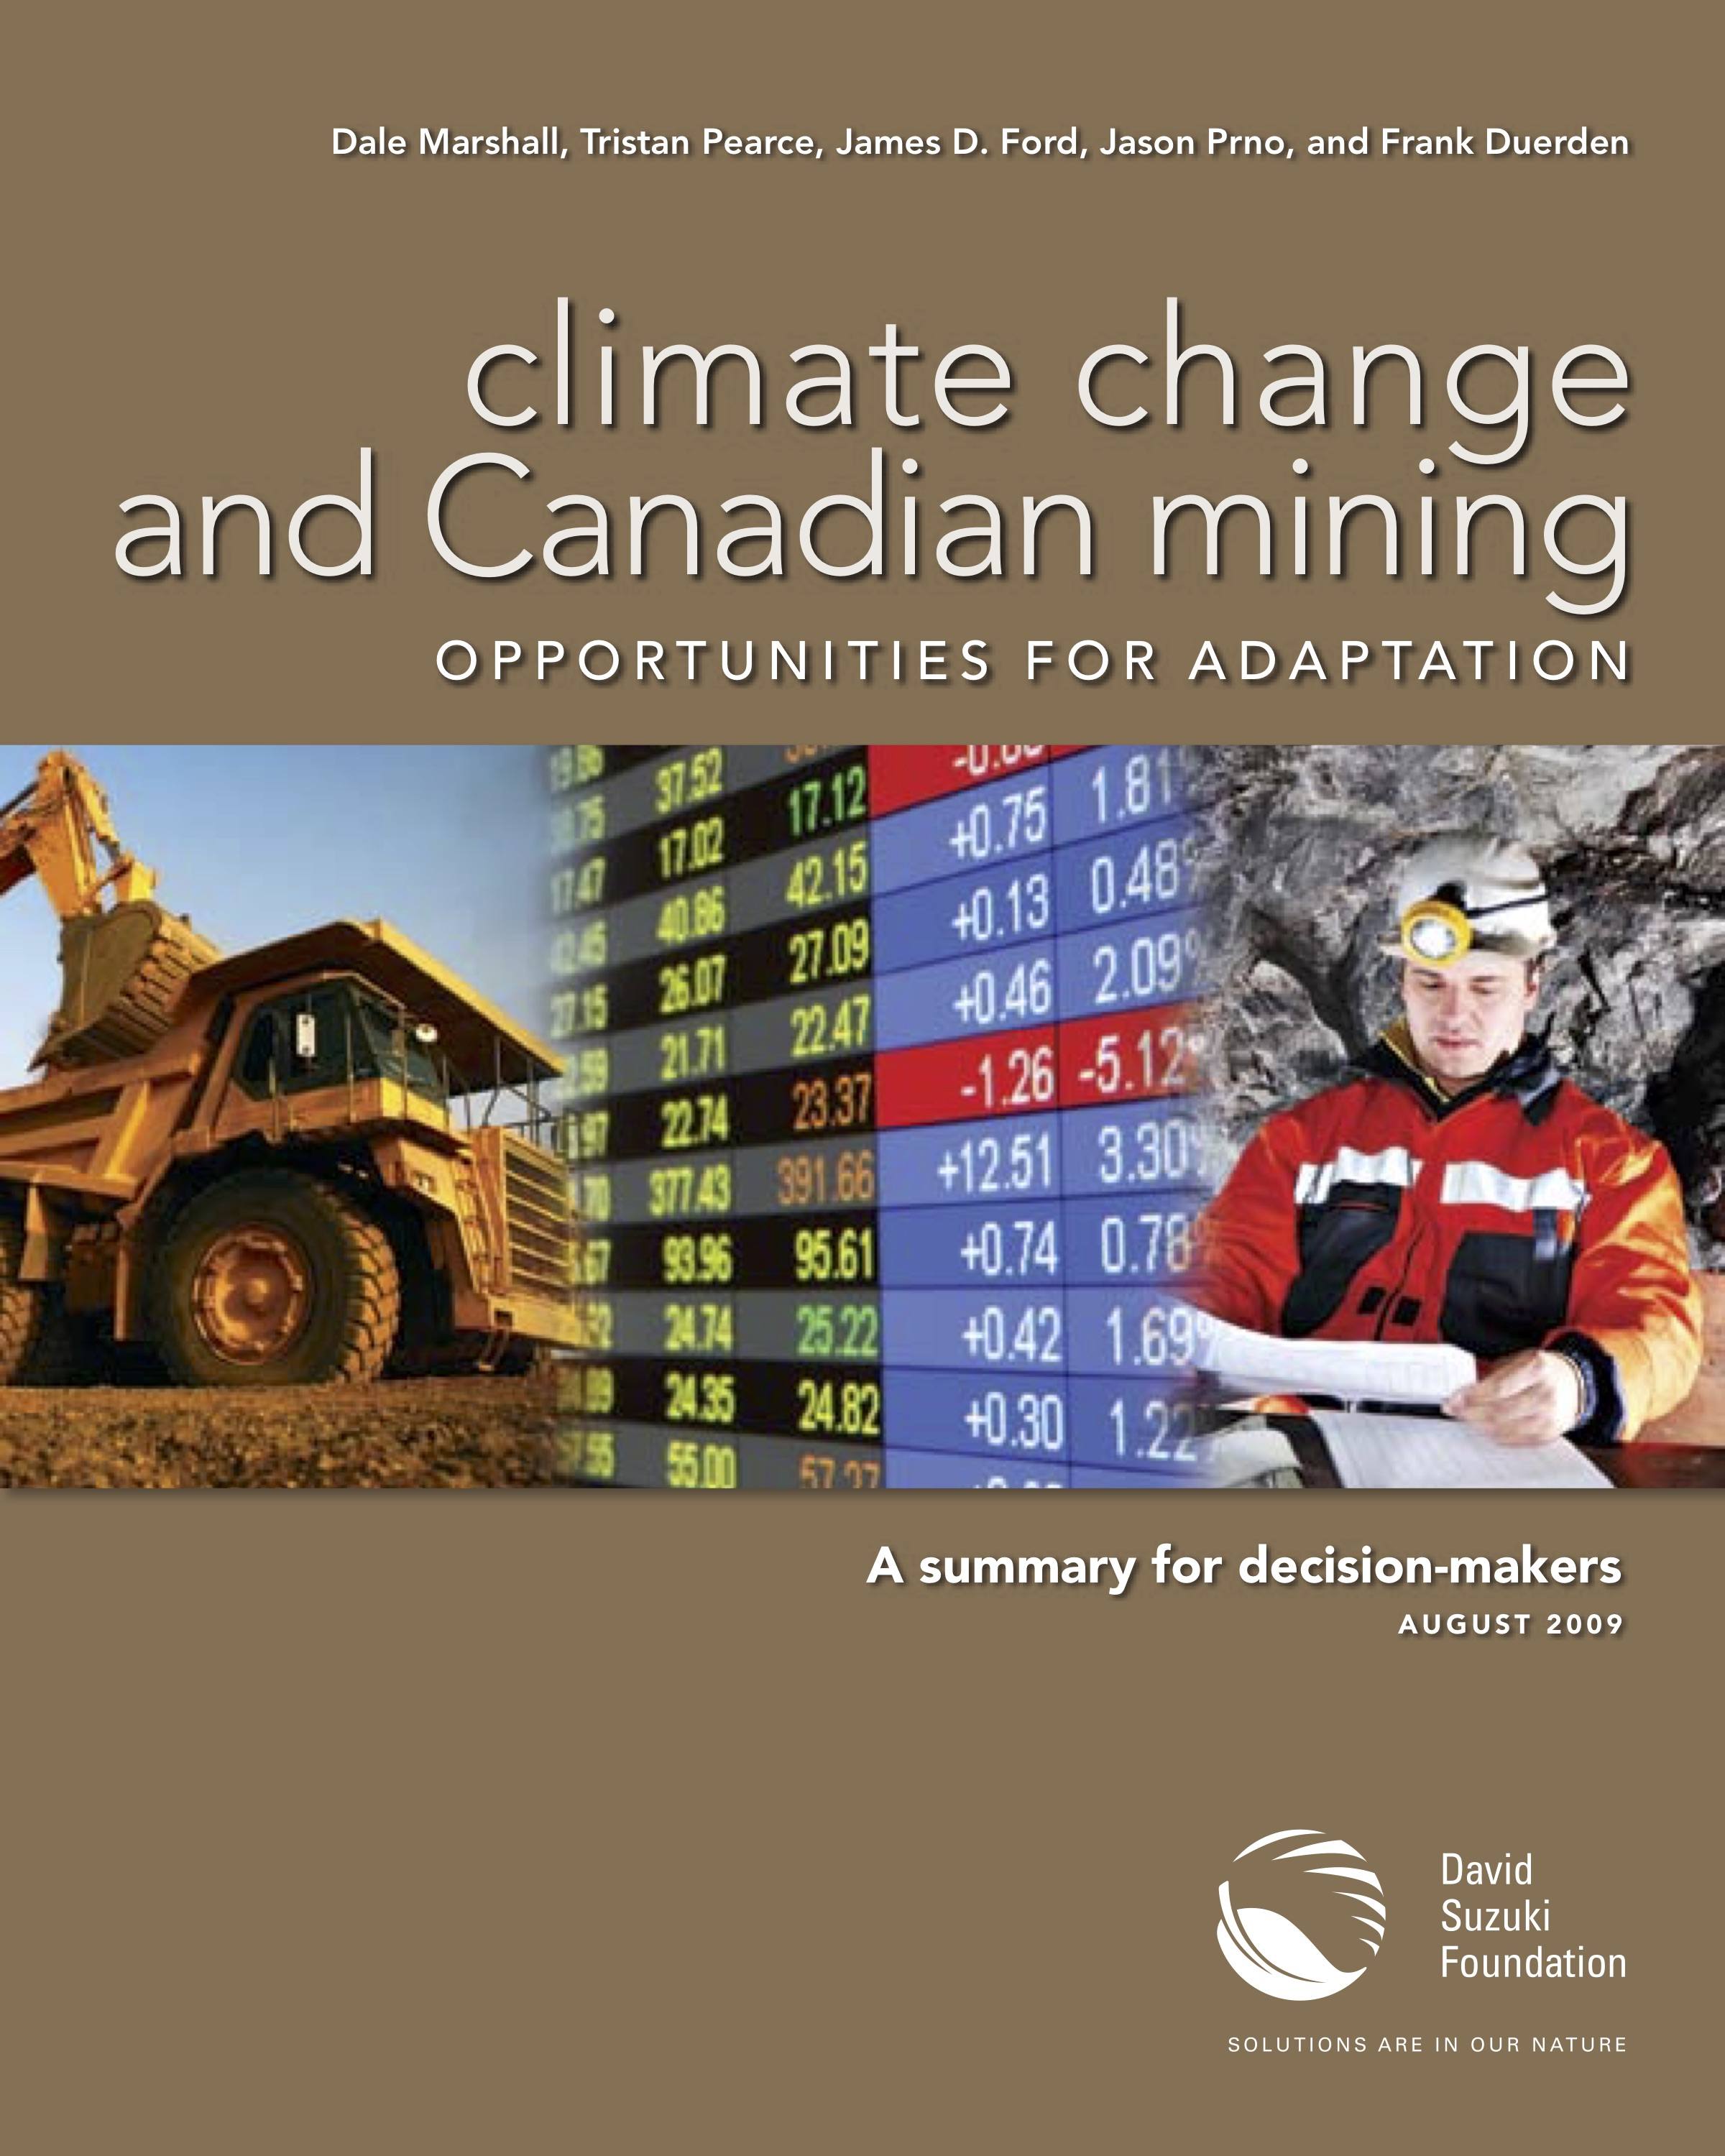 EXECUTIVE SUMMARY — Climate Change and Canadian Mining: Opportunities for Adaptation